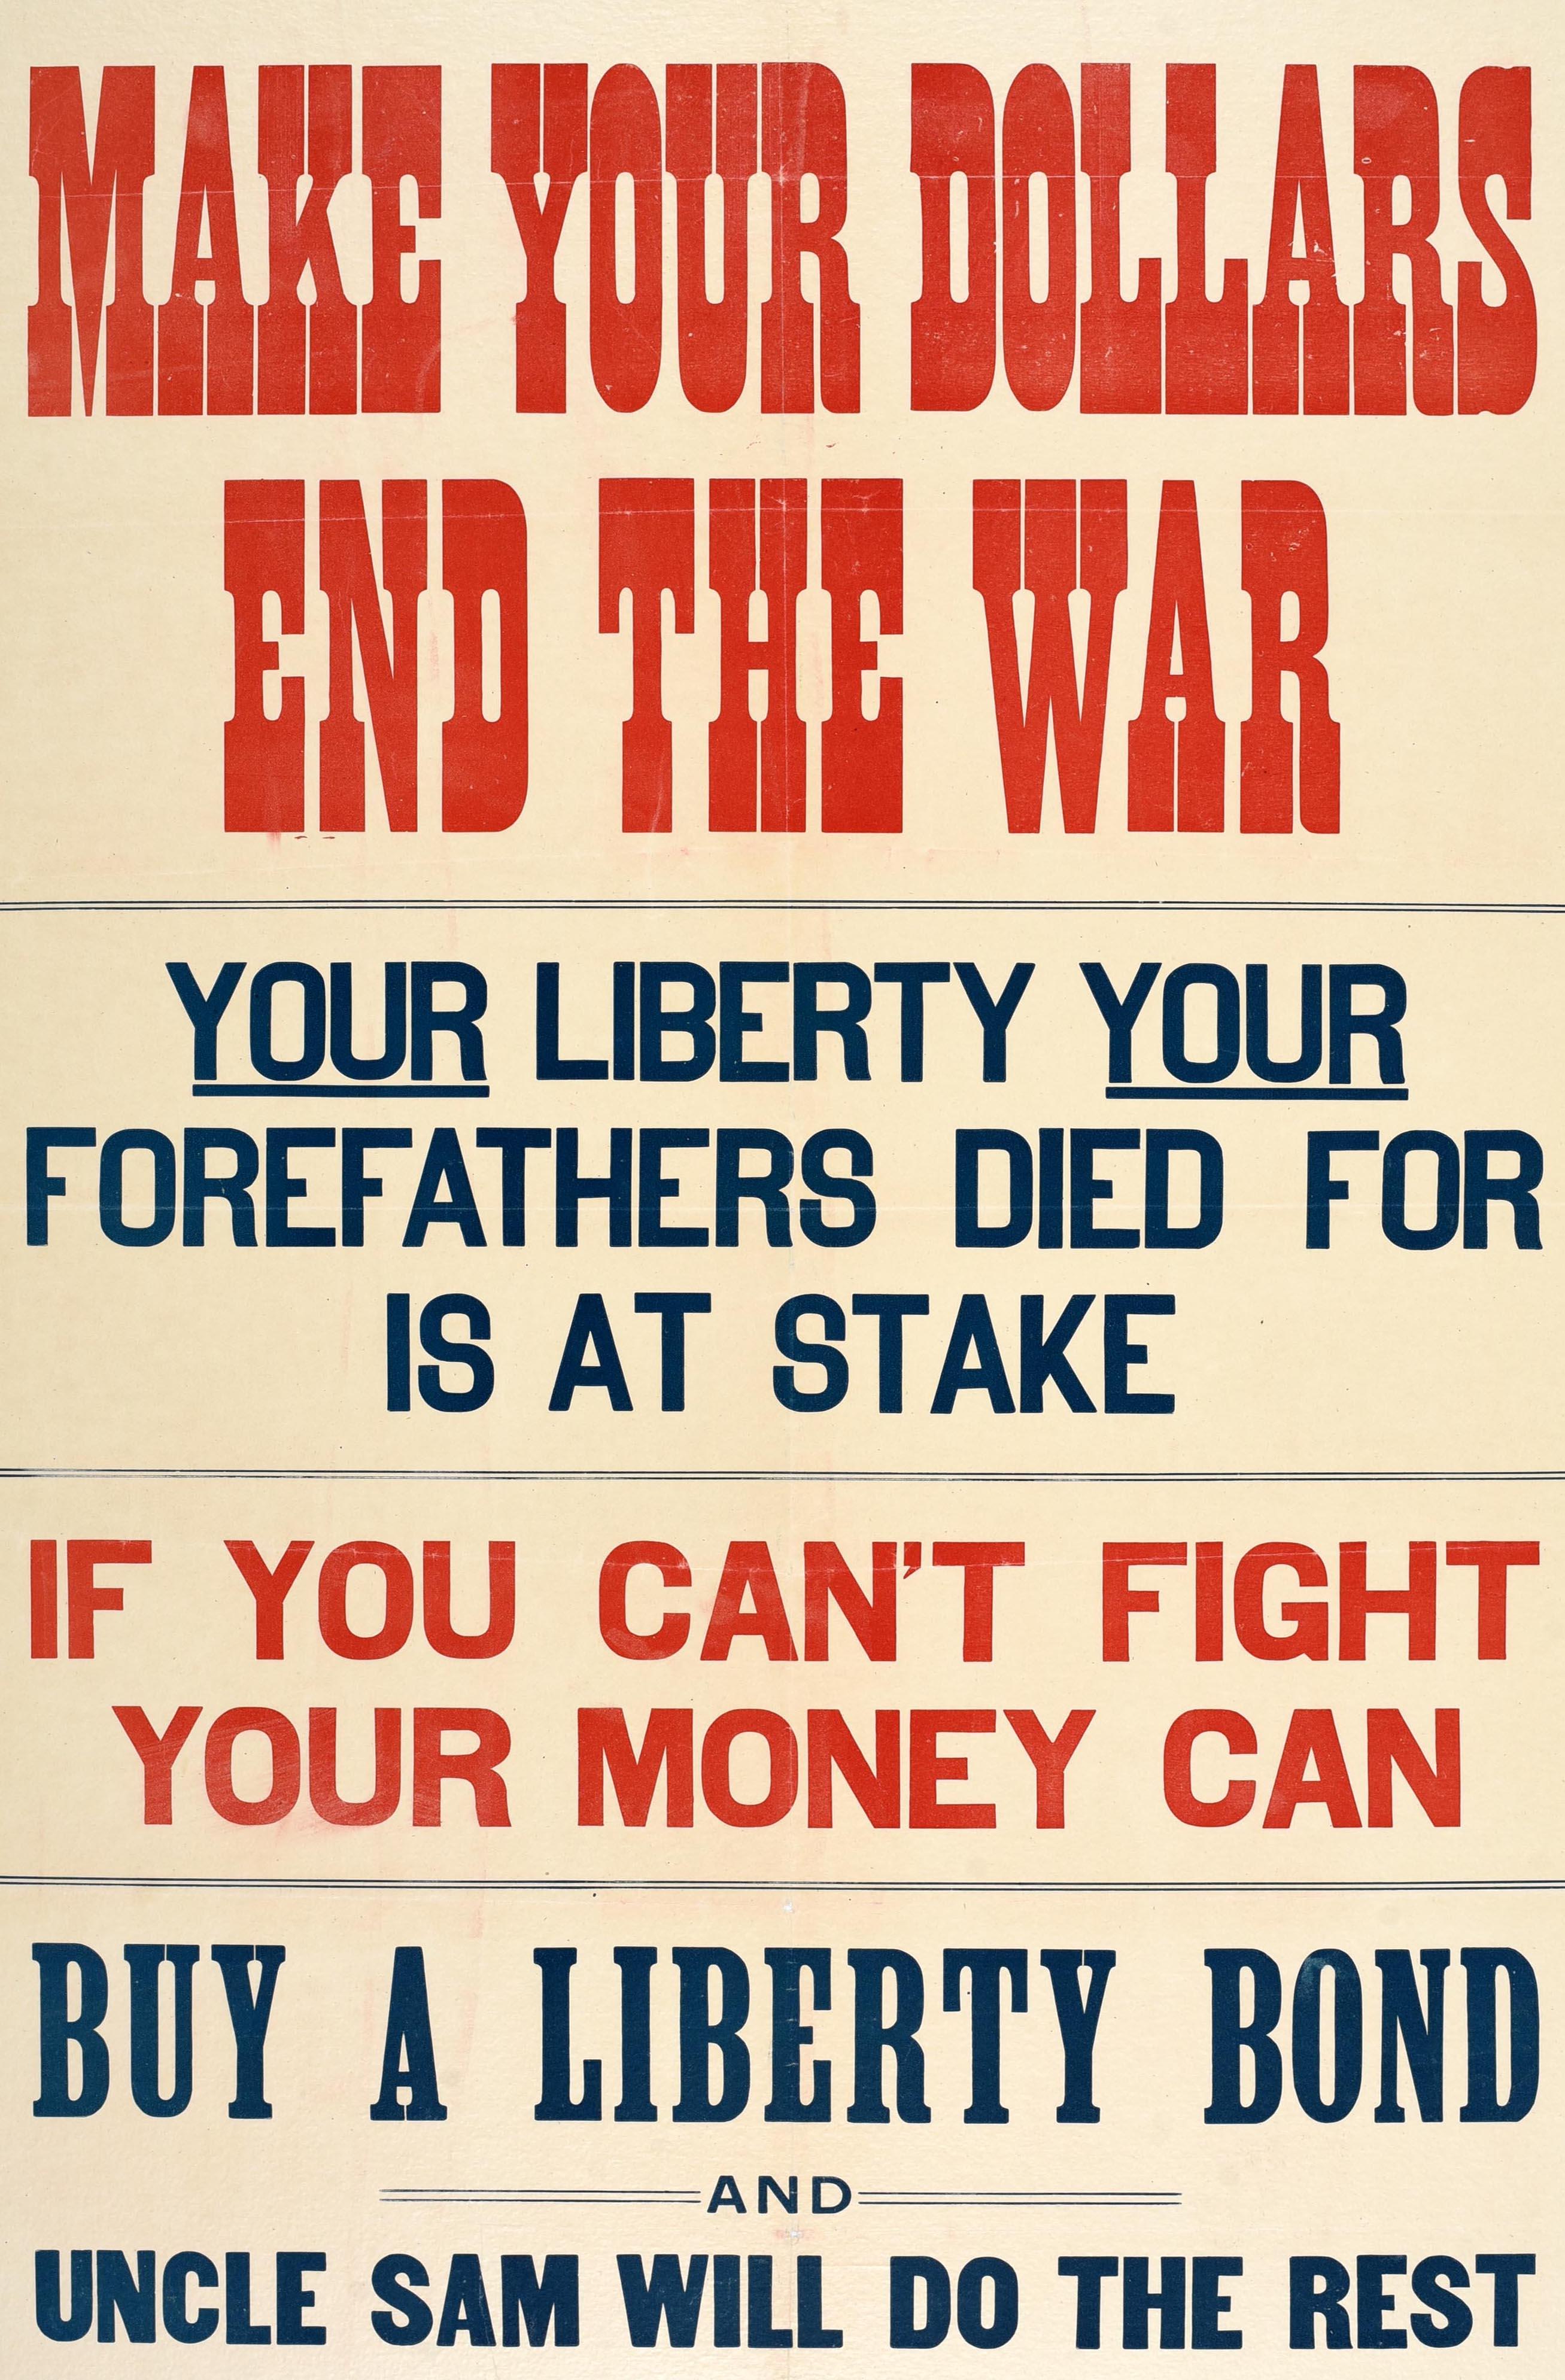 Original antique World War One home front war loan poster featuring bold red and blue lettering - Make your dollars end the war Your liberty your forefathers died for is at stake If you can't fight your money can Buy a liberty bond and Uncle Sam